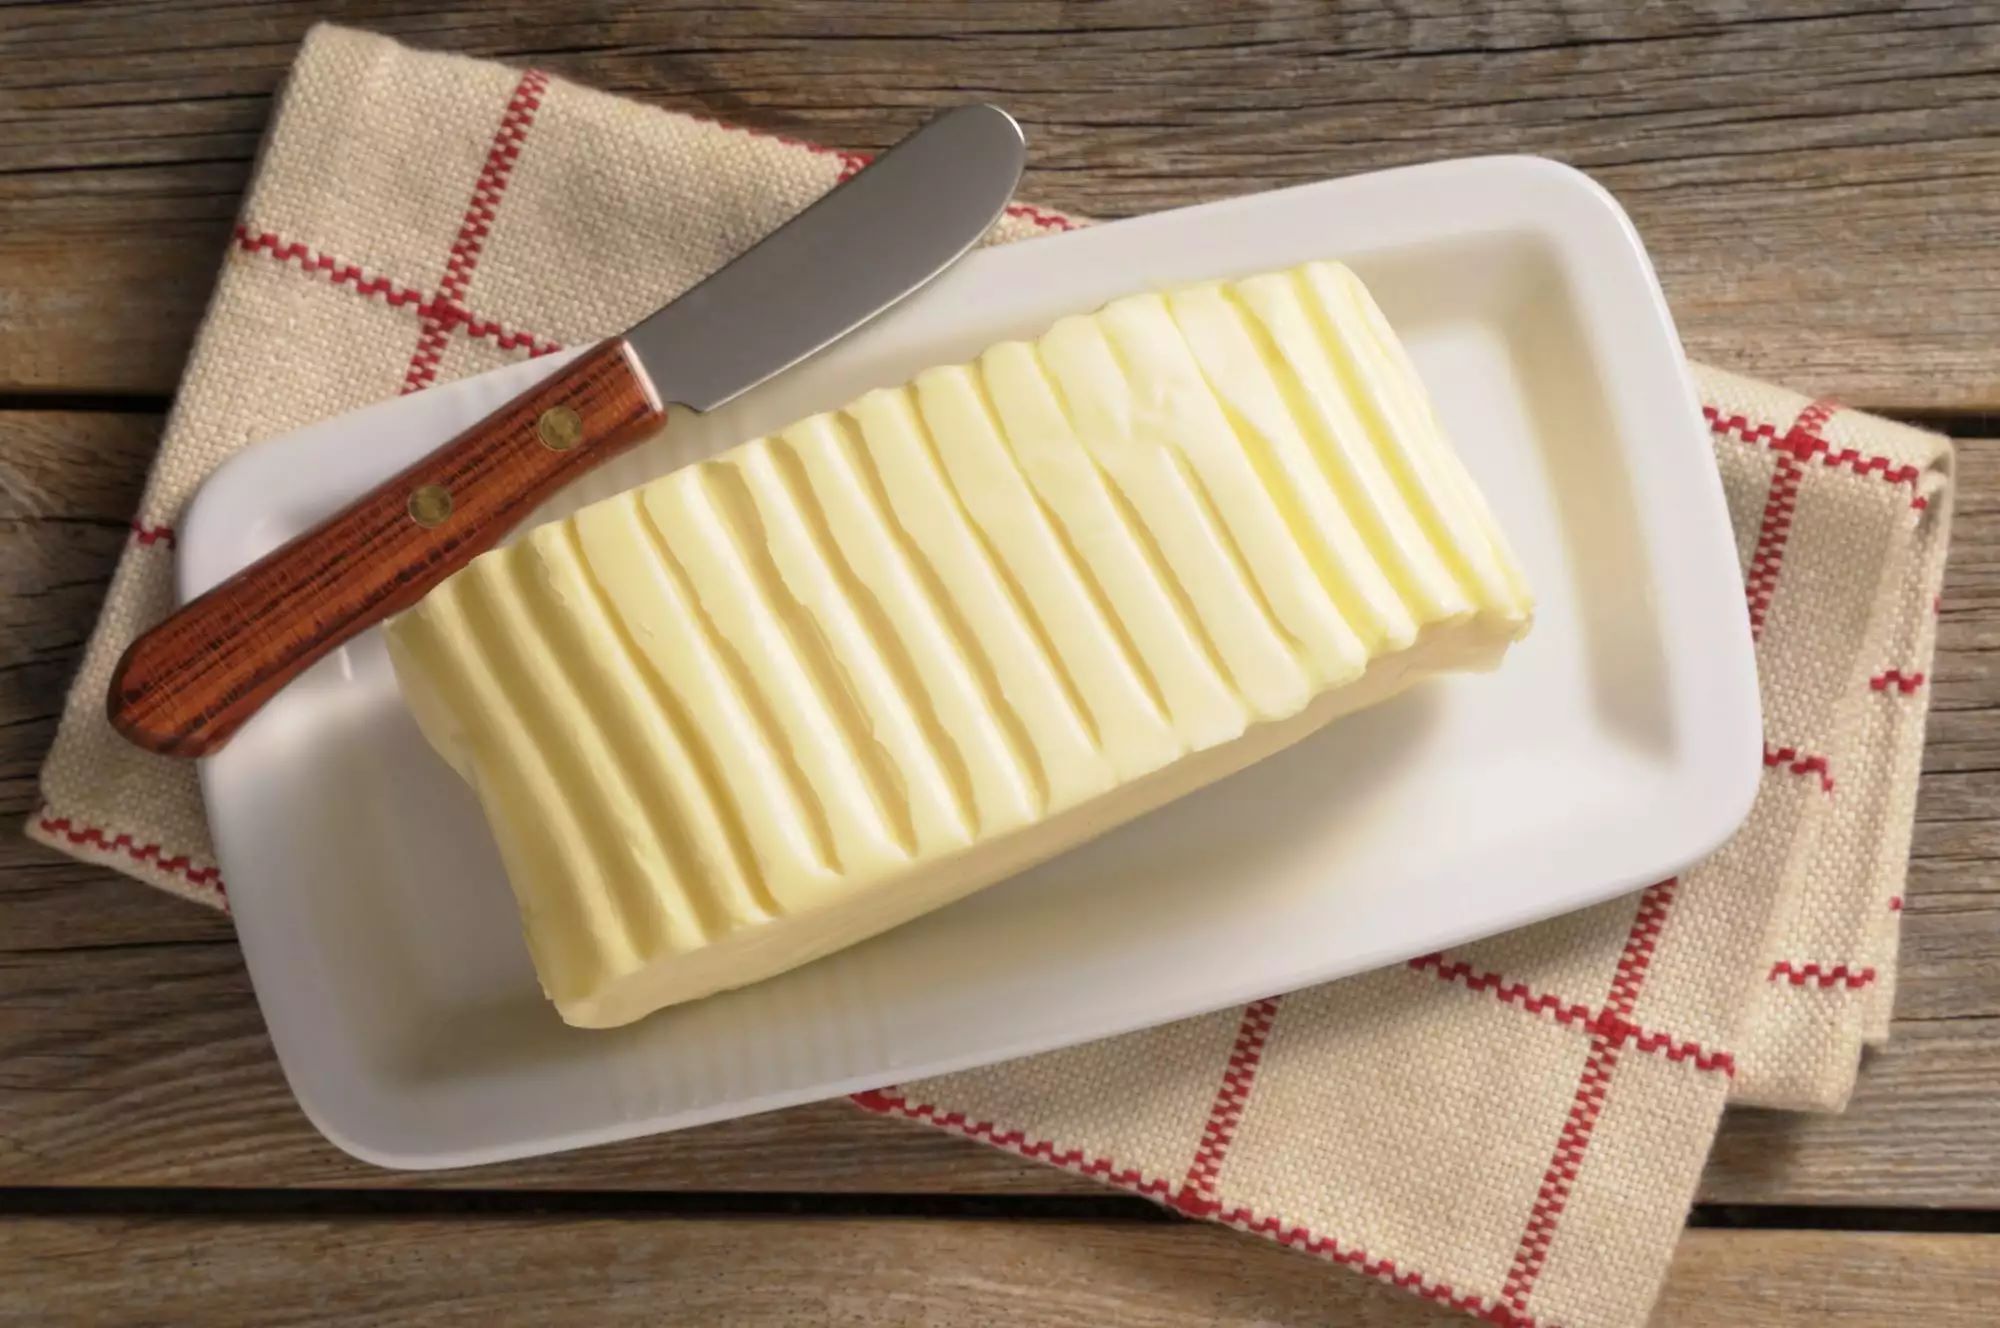 How To Store Butter At Room Temperature